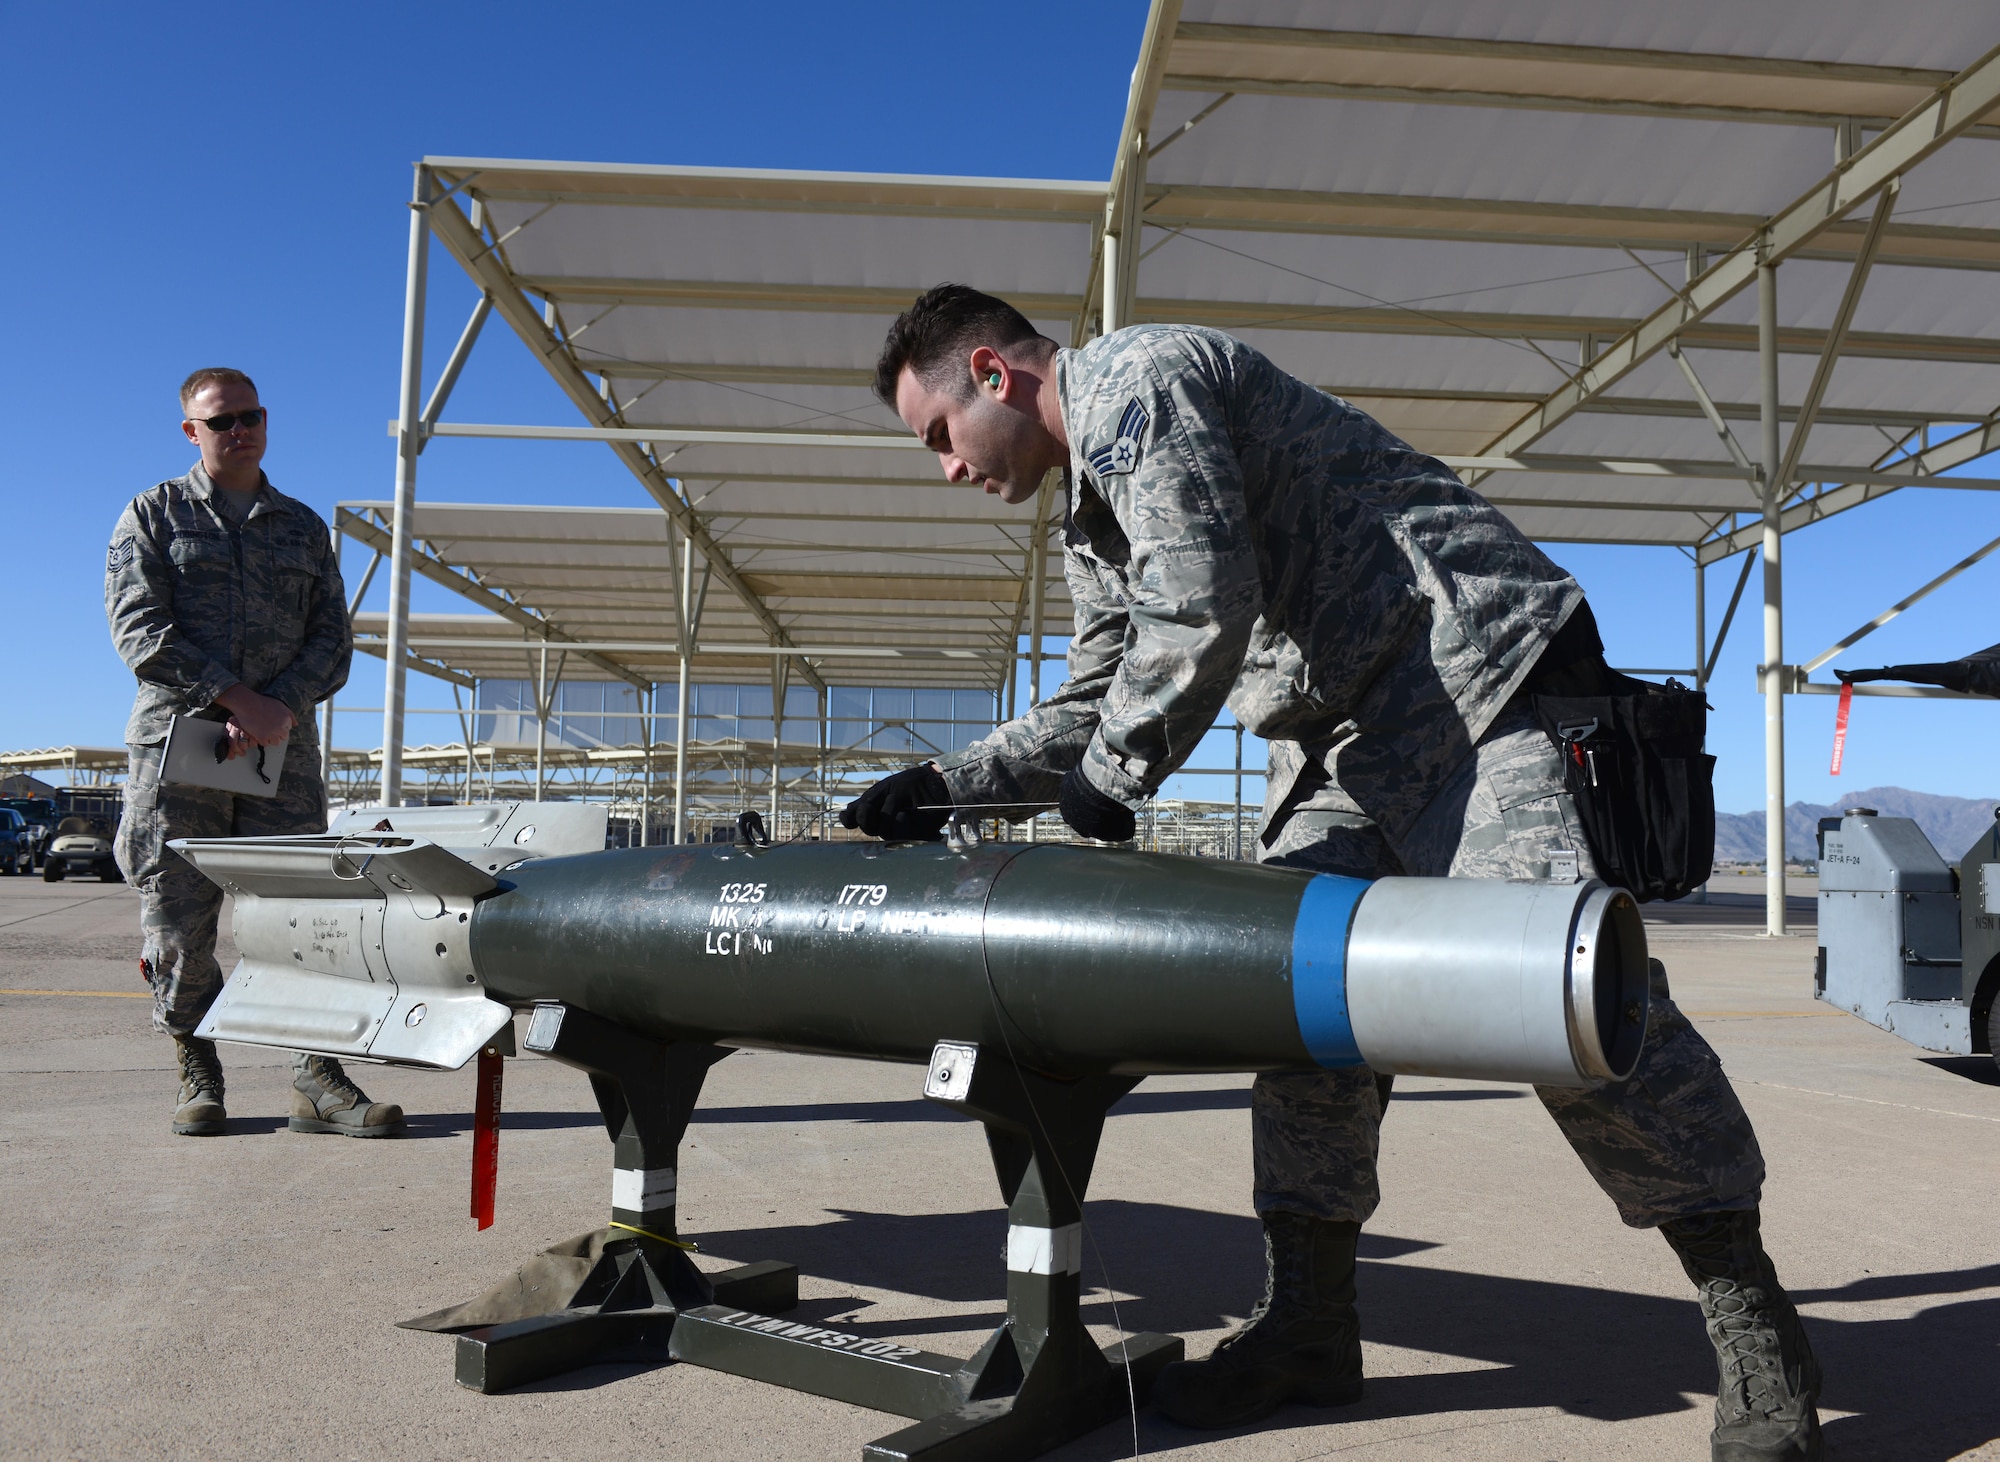 Senior Airman Derek Thayer, 310th Aircraft Maintenance Unit aircraft armament, prepares to load a GBU-12 bomb during the annual Load Crew Competition Jan. 27, 2017, at Luke Air Force Base, Ariz. Airmen from various AMUs competed by loading weapons on their respective aircraft aiming for the fastest and safest time possible. (U.S. Air Force photo by Airman 1st Class Alexander Cook)